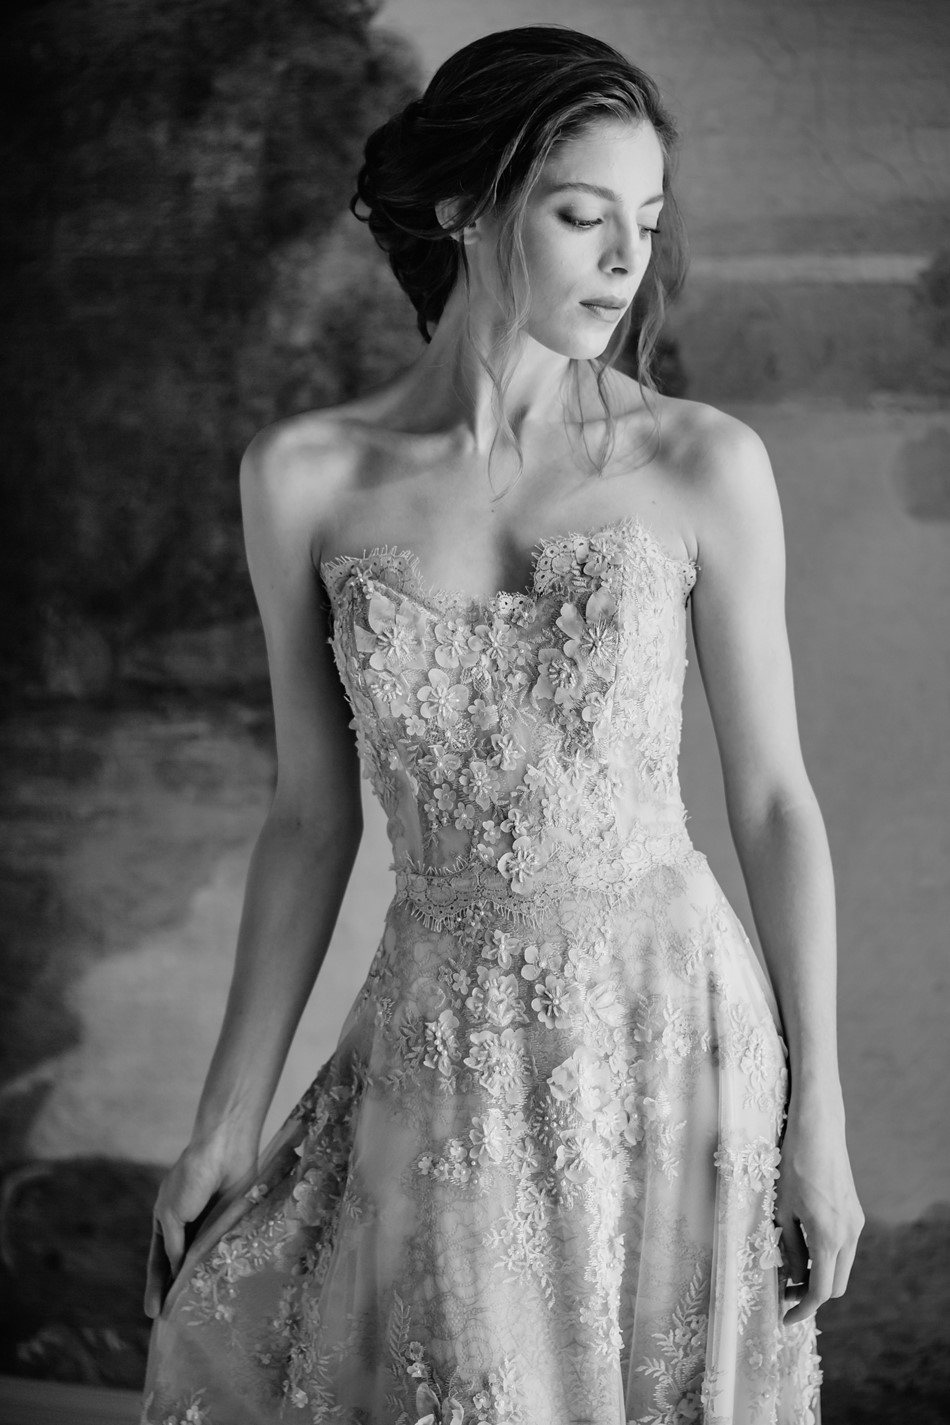 Claire Pettibone's New Timeless Bridal Gown Collection - Chic Vintage ...